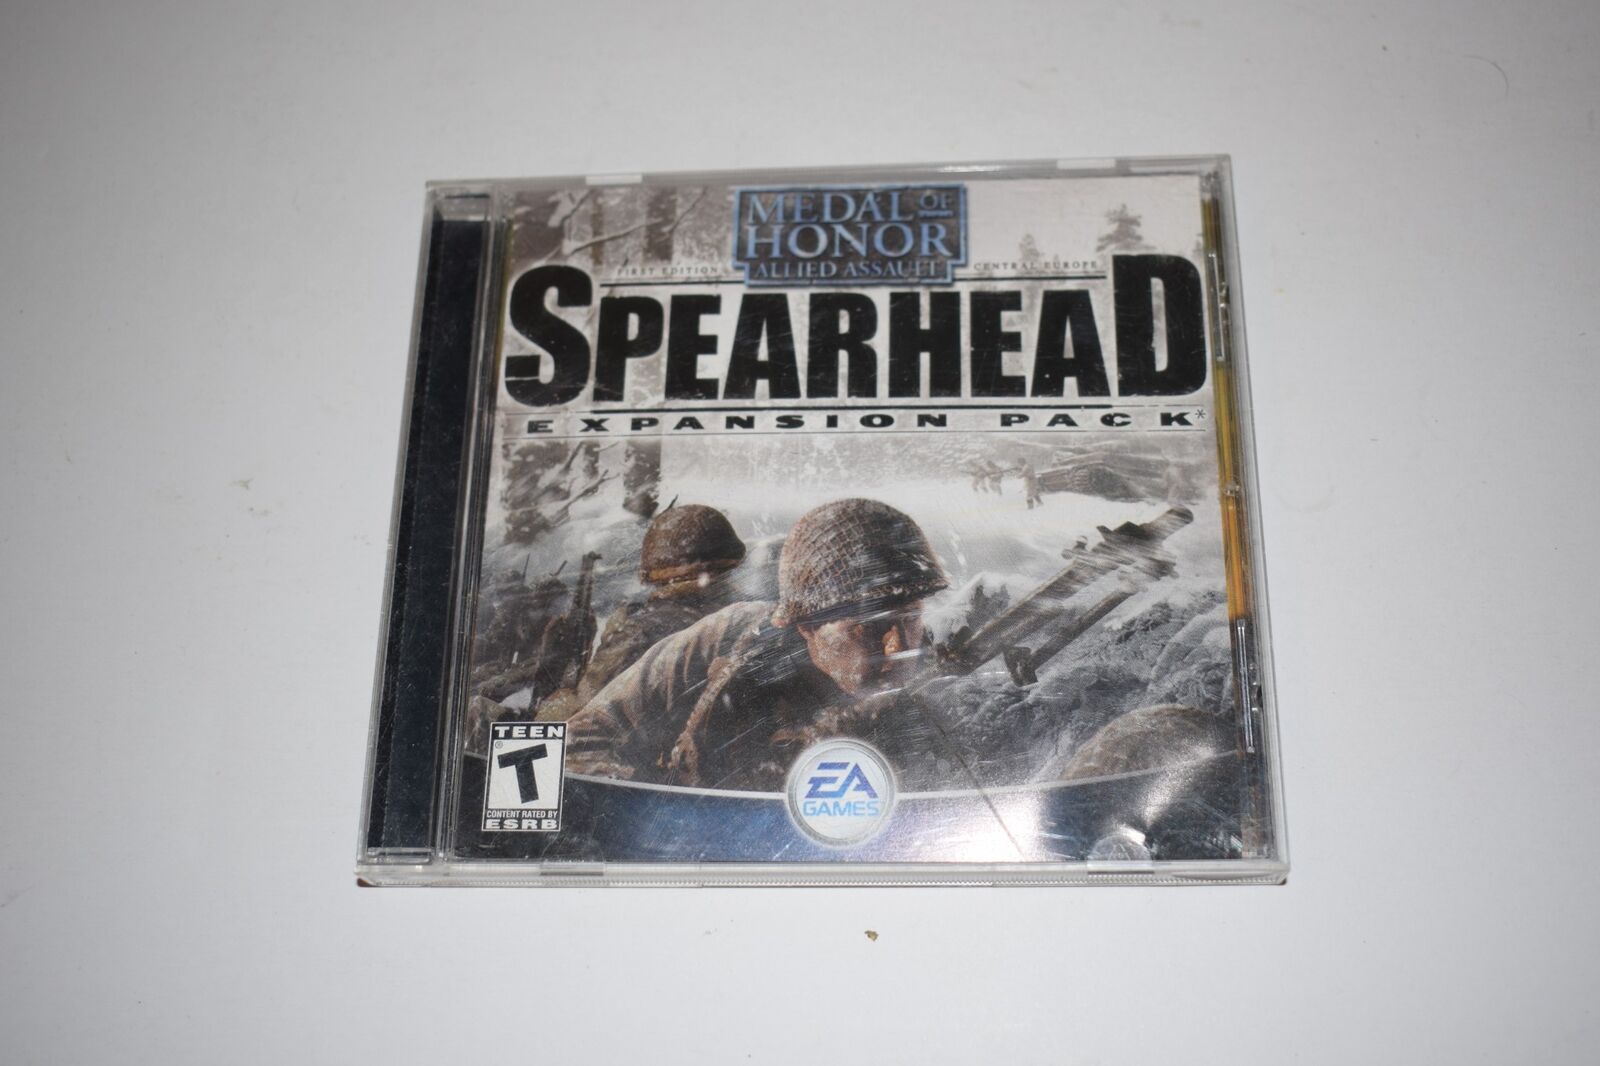 Medal of Honor: Allied Assault “Spearhead” Expansion Pack PC Game   (MVY48)